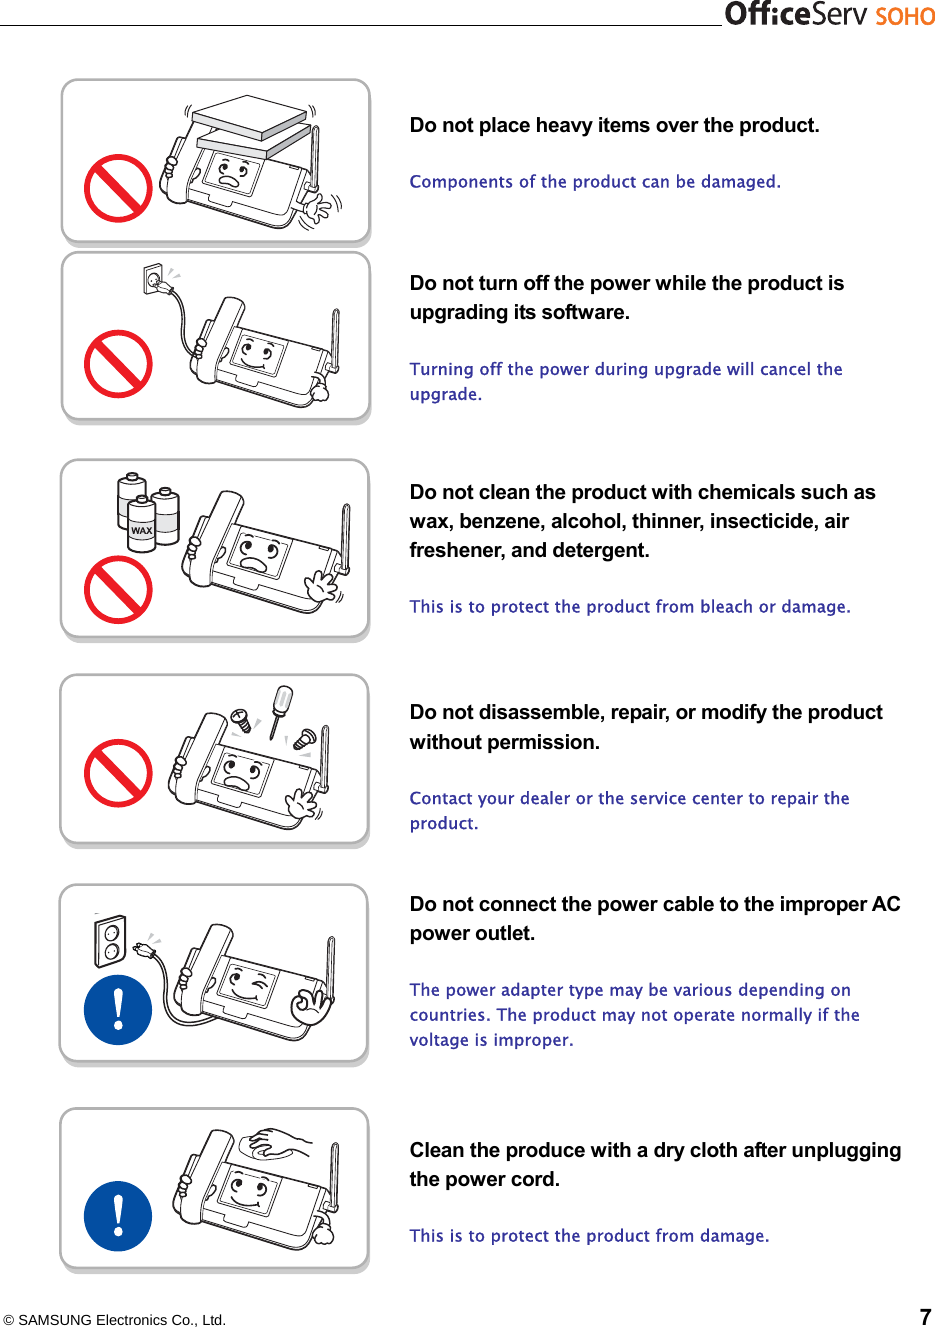   © SAMSUNG Electronics Co., Ltd.    7   Do not place heavy items over the product.  Components of the product can be damaged.    Do not turn off the power while the product is upgrading its software.  Turning off the power during upgrade will cancel the upgrade.    Do not clean the product with chemicals such as wax, benzene, alcohol, thinner, insecticide, air freshener, and detergent.    This is to protect the product from bleach or damage.      Do not disassemble, repair, or modify the product without permission.  Contact your dealer or the service center to repair the product.   Do not connect the power cable to the improper AC power outlet.    The power adapter type may be various depending on countries. The product may not operate normally if the voltage is improper.    Clean the produce with a dry cloth after unplugging the power cord.    This is to protect the product from damage.   